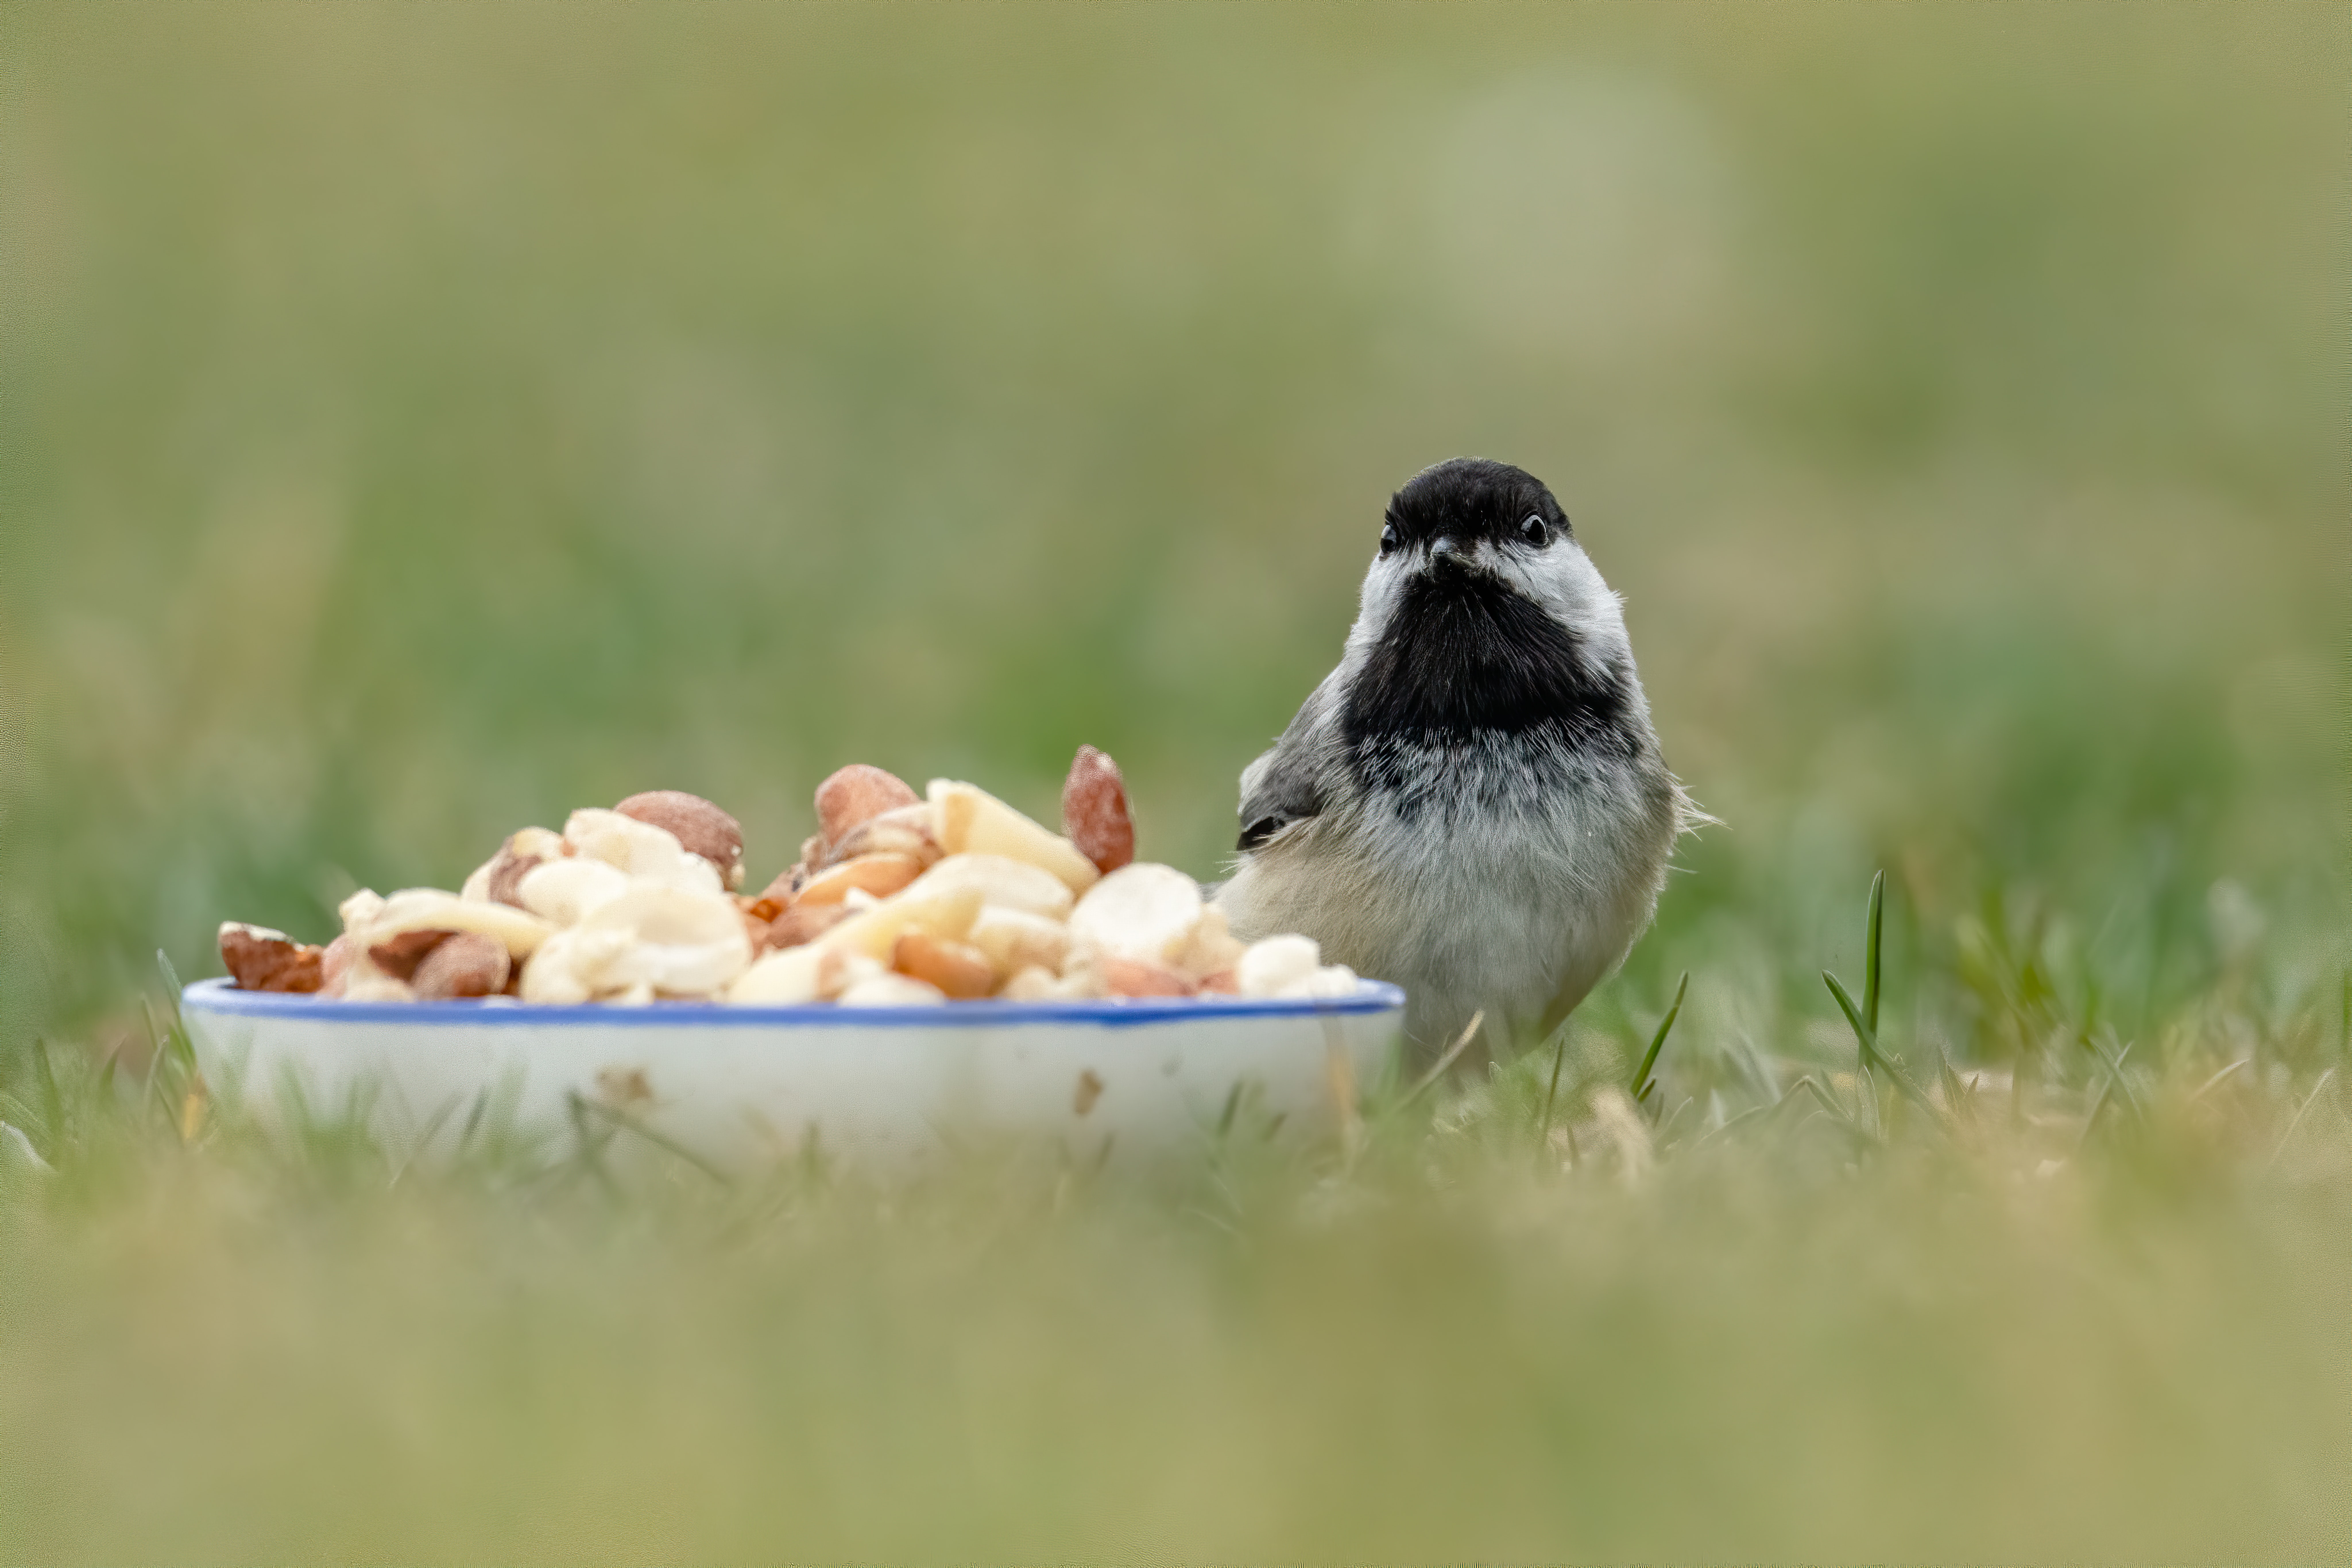 Wild birds don't need your backyard feeders to survive